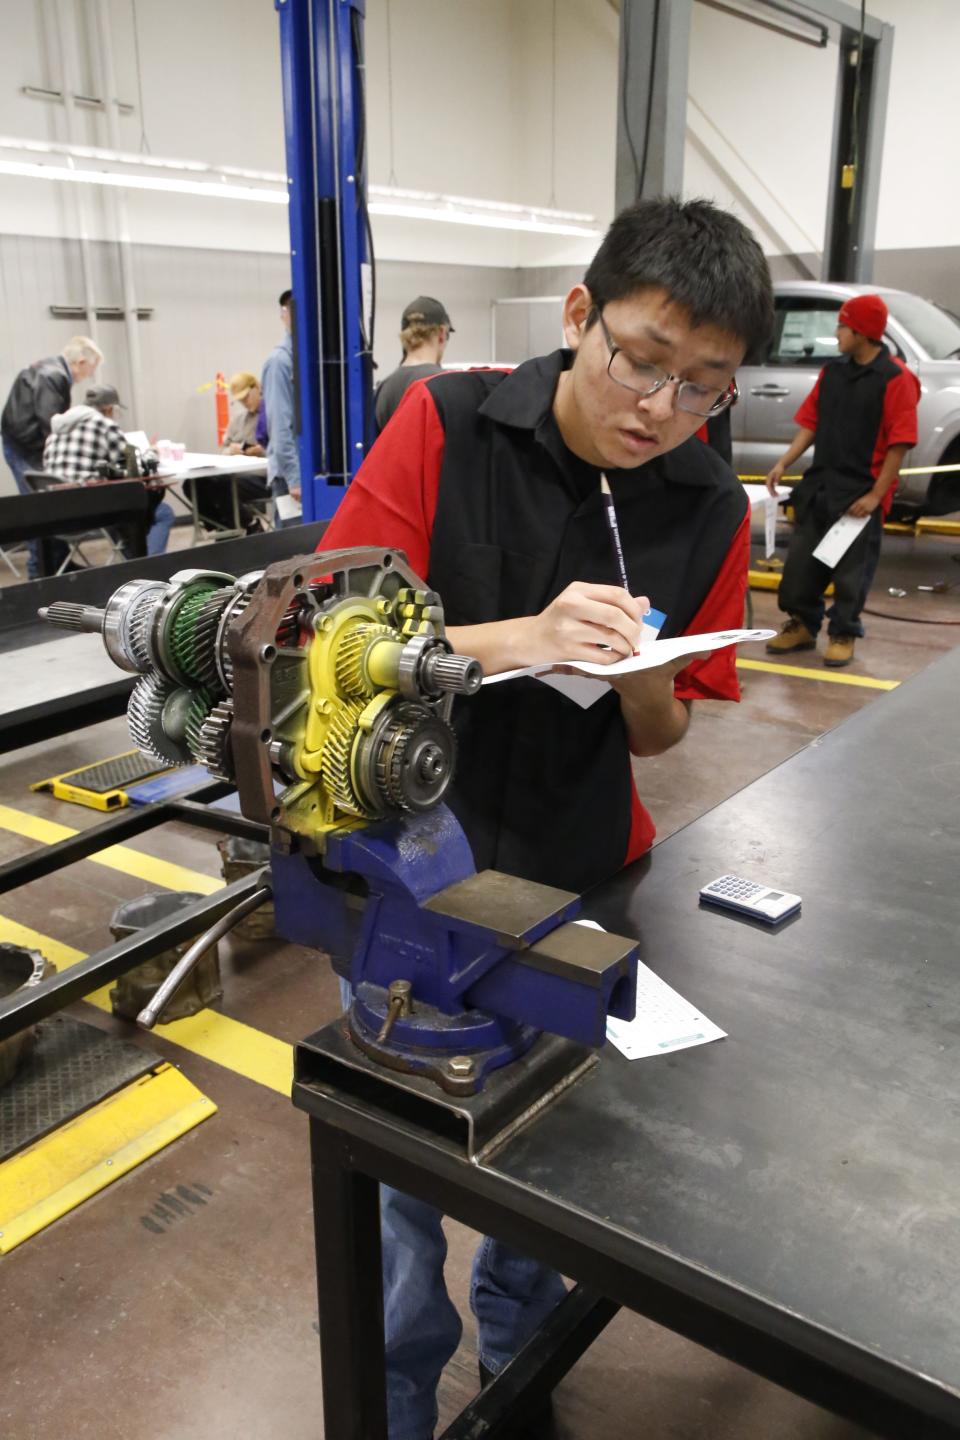 Robert Begaye of Farmington HIgh School was one of nearly 200 high school and college students from across the region taking part in the Skills USA regional competition on Friday, Nov. 17 at San Juan College.